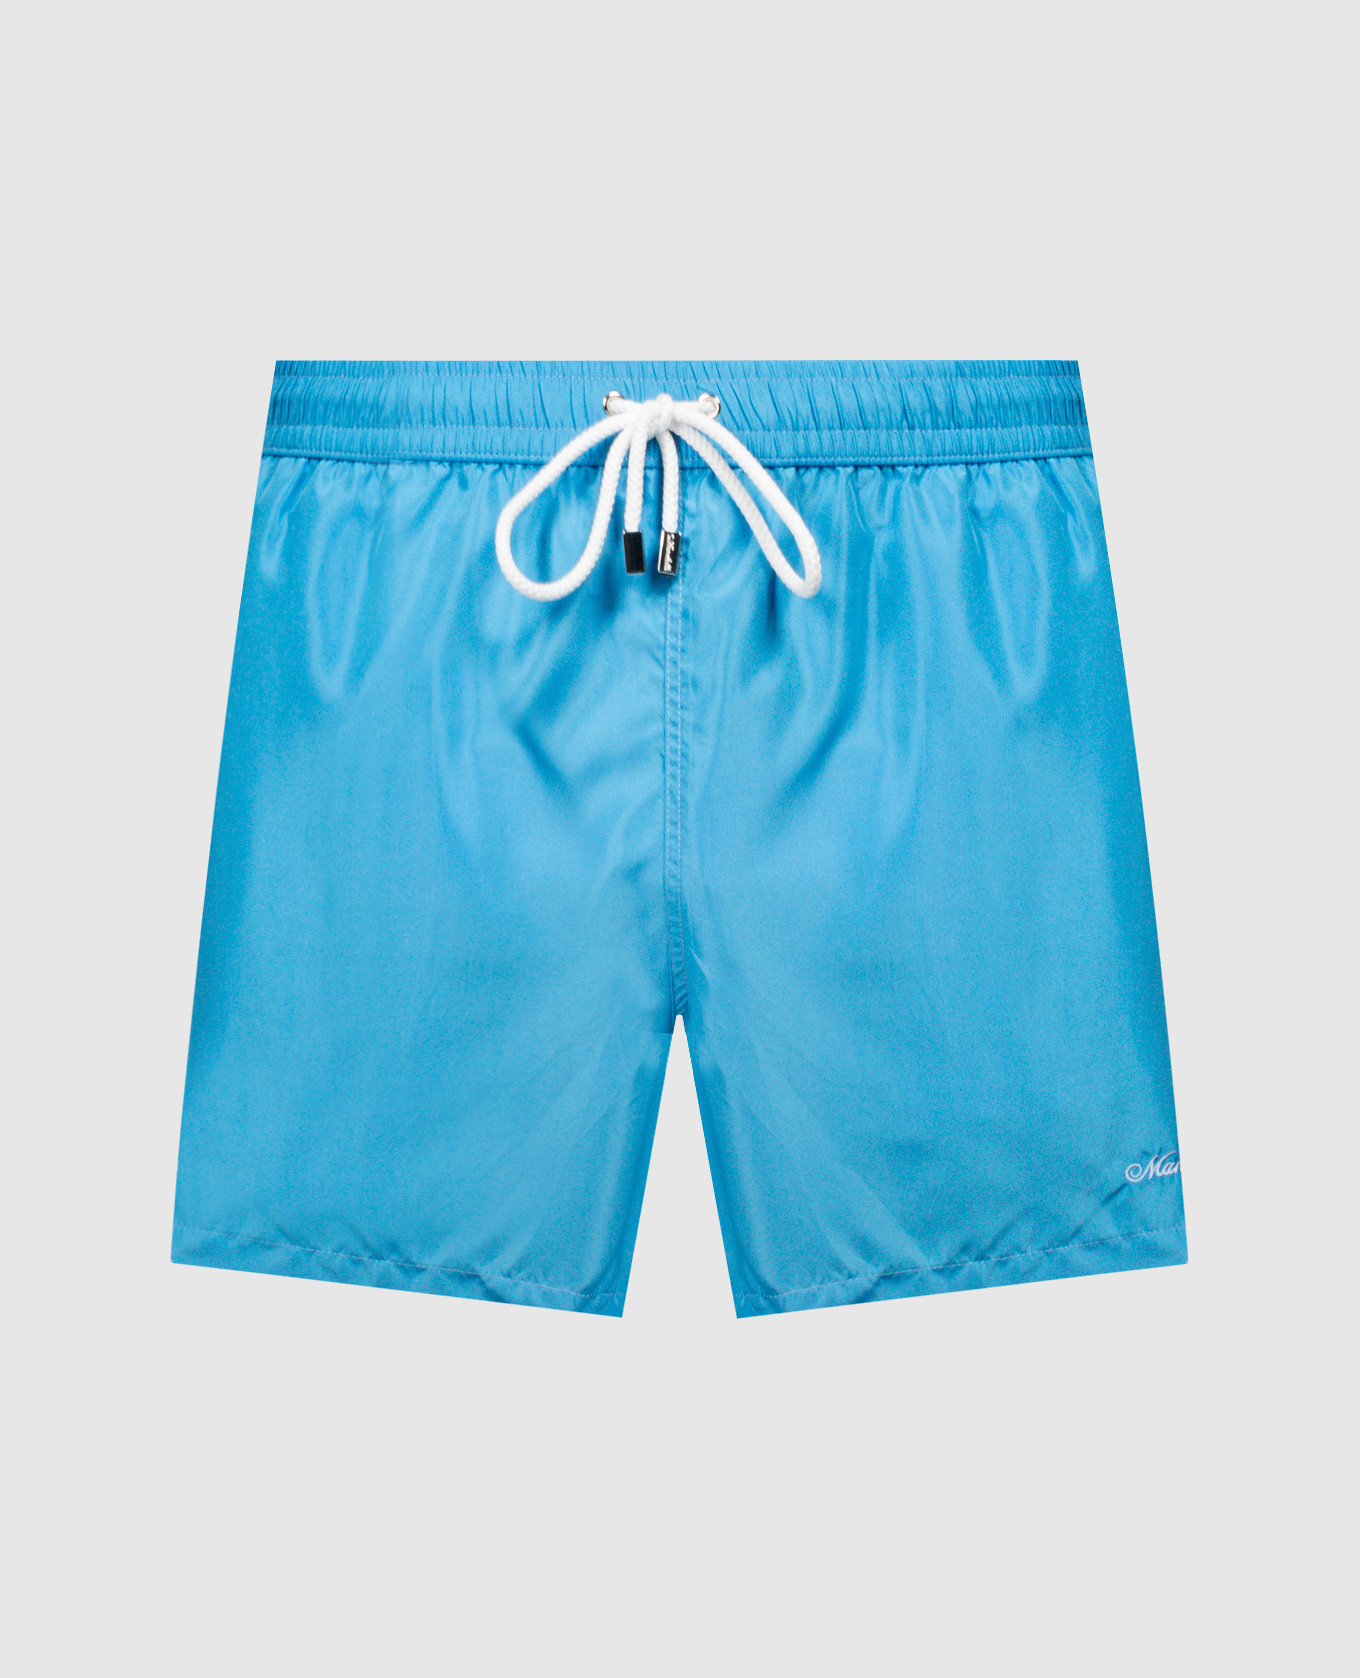 Blue swim shorts with logo embroidery